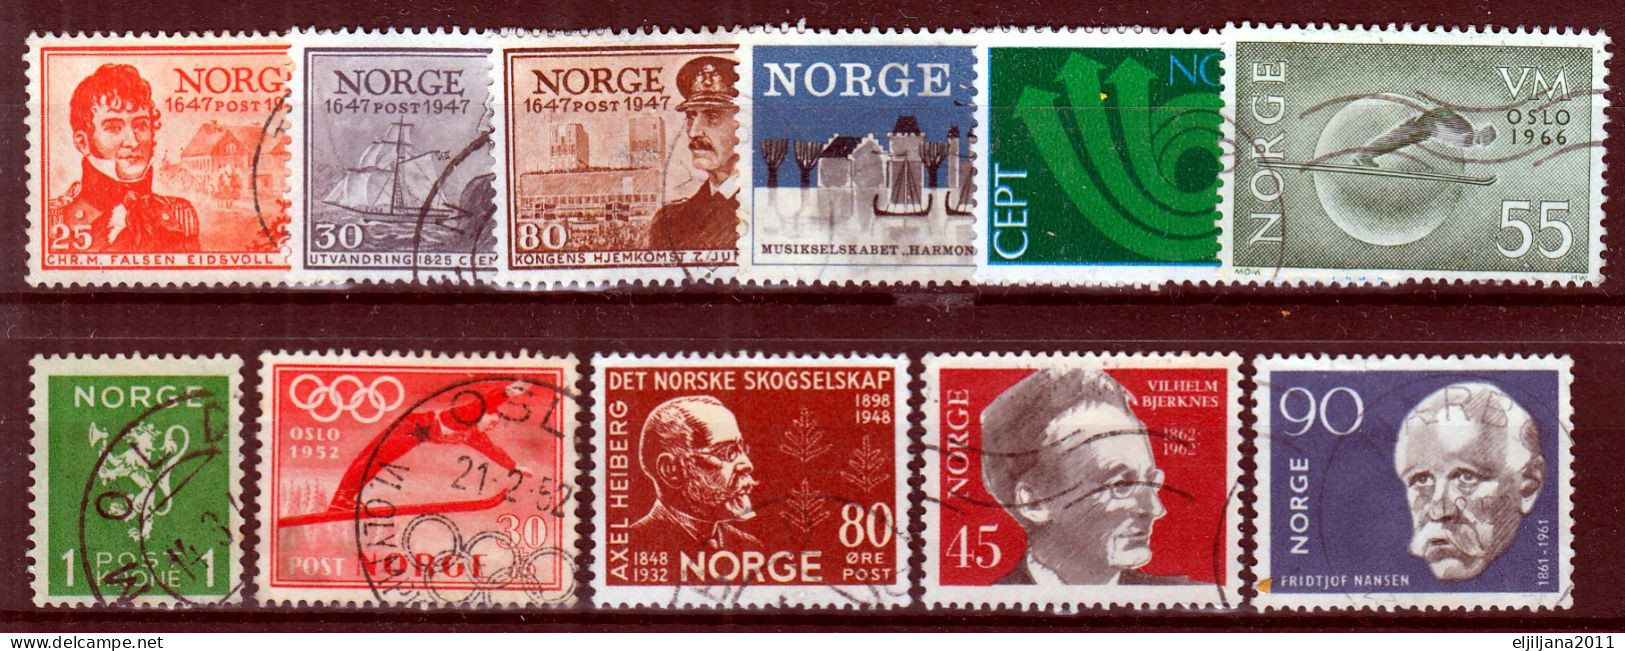 Action !! SALE !! 50 % OFF !! ⁕ Norway / NORGE 1938 - 1966 ⁕ Nice Collection / Lot ⁕ 32v Used - See Scan - Collezioni